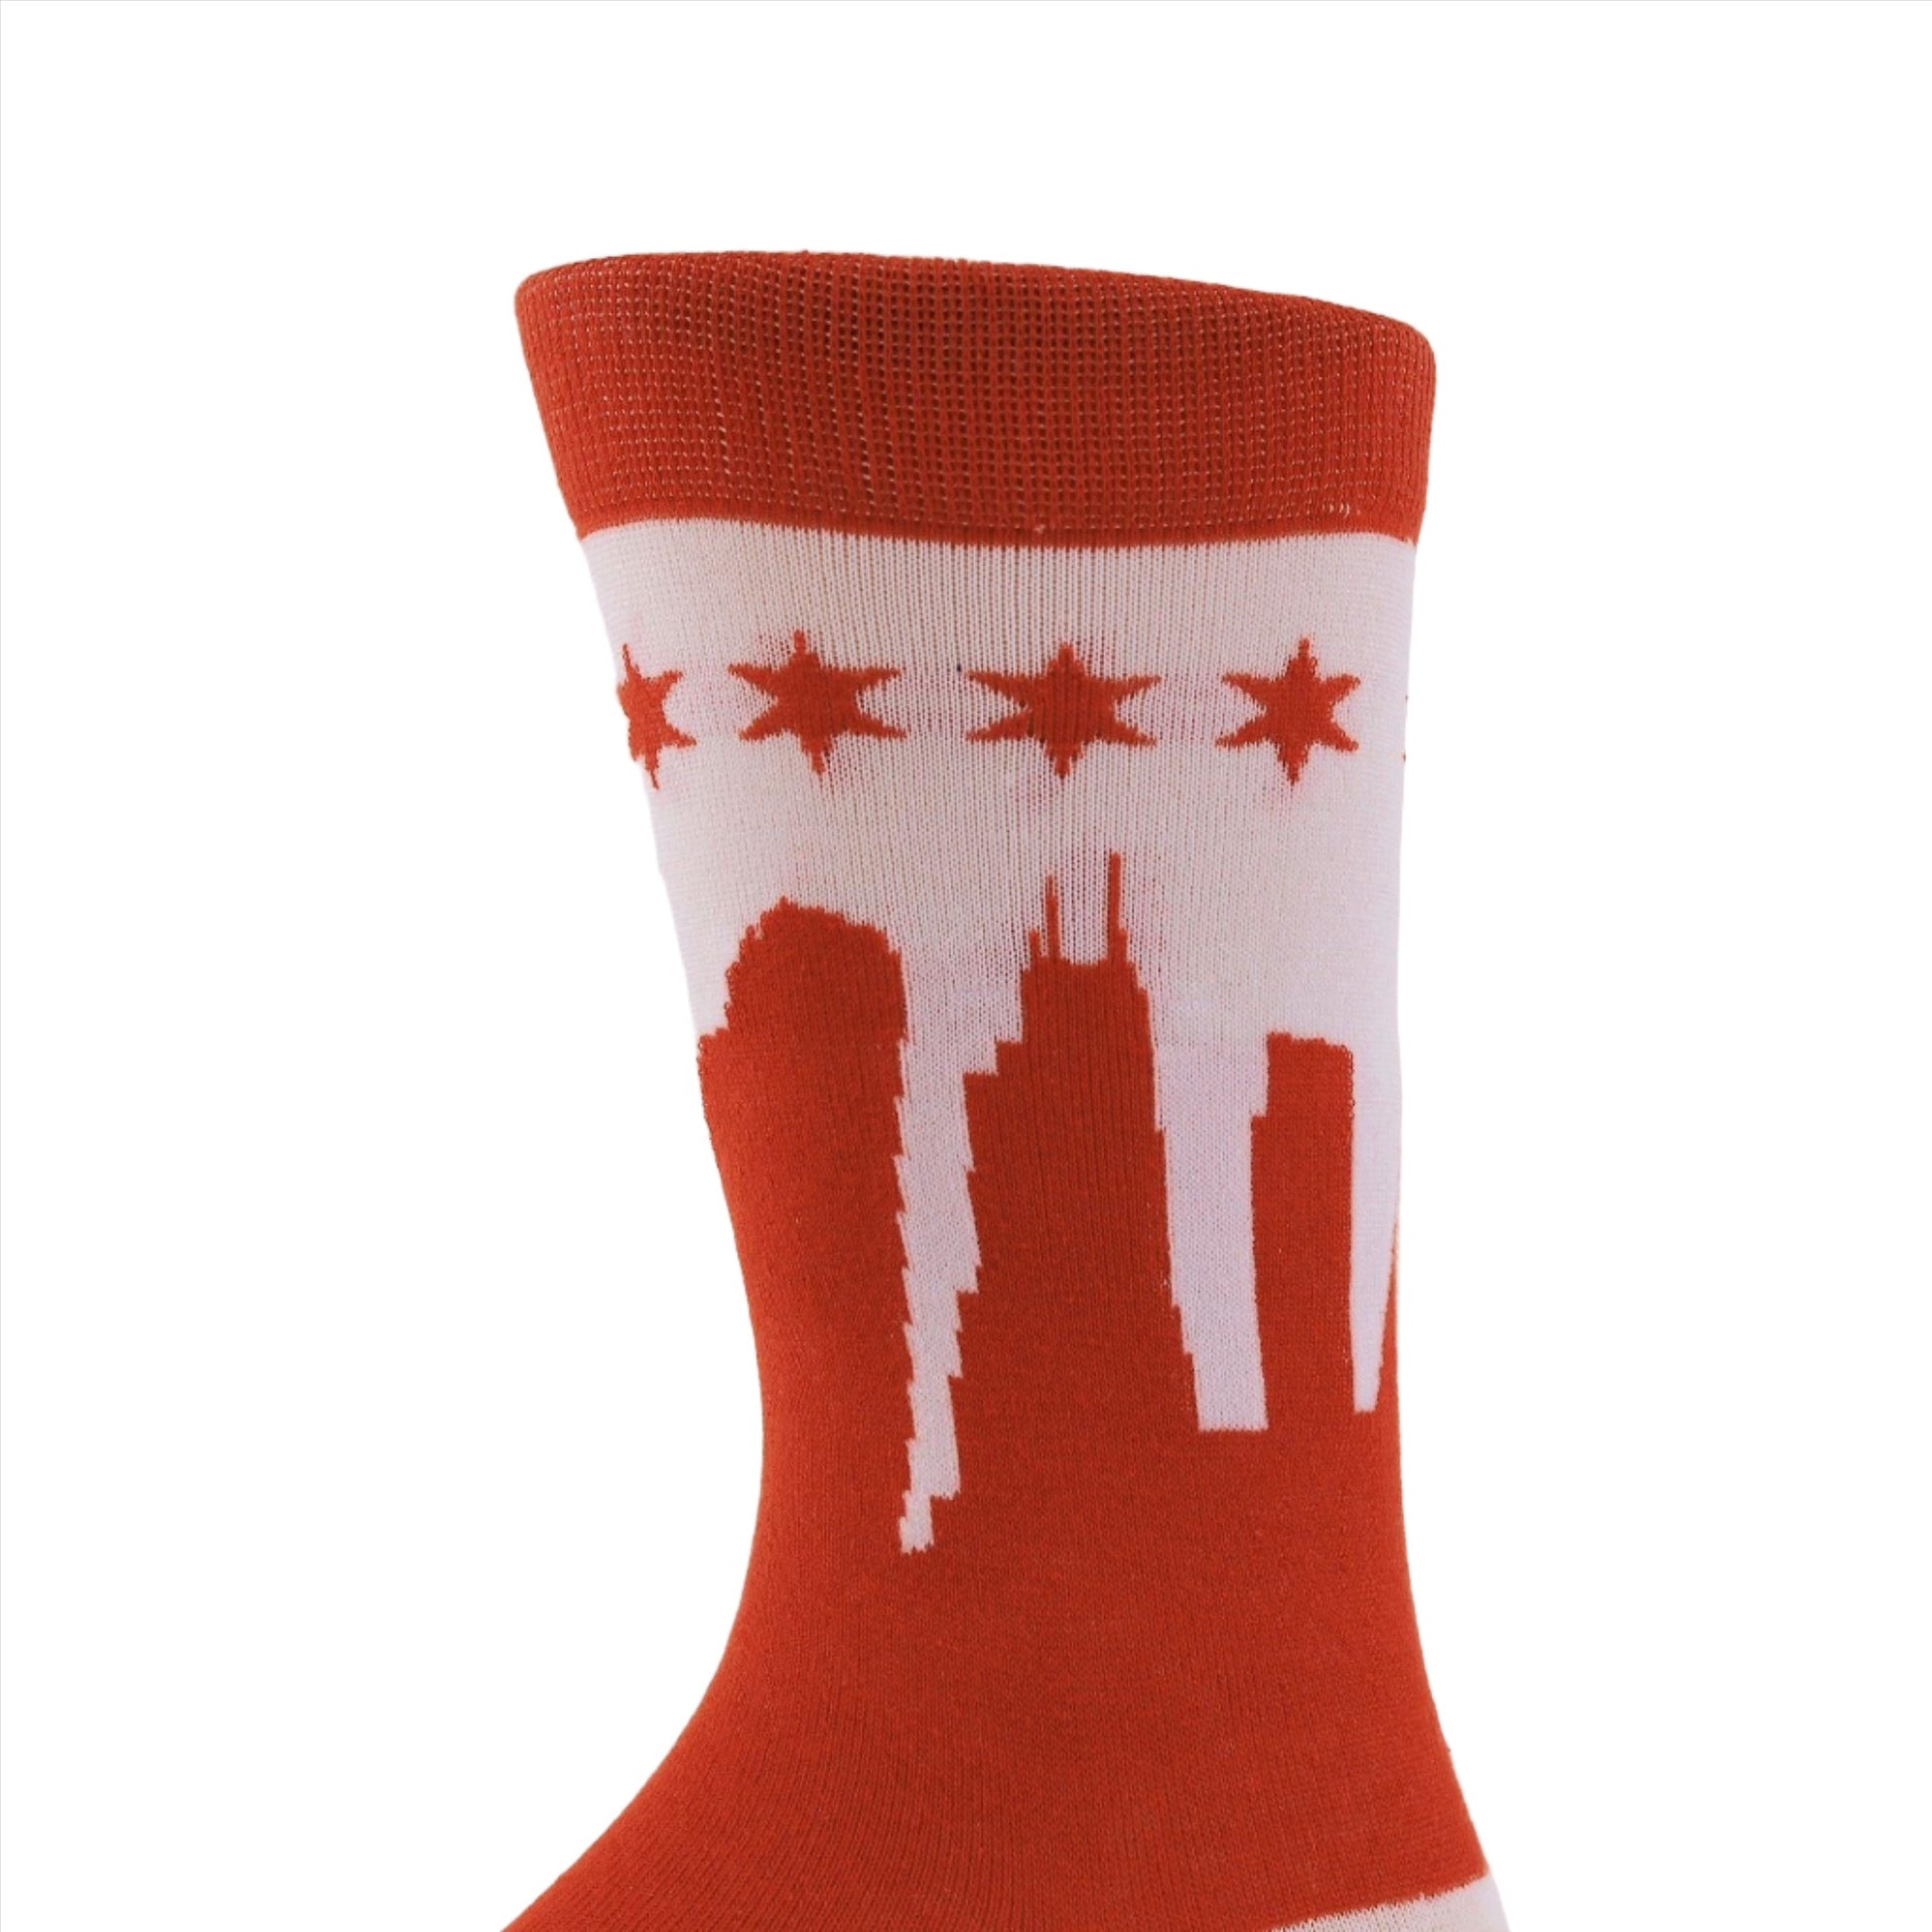 Chicago Perspective Skyline Socks - Love From USA